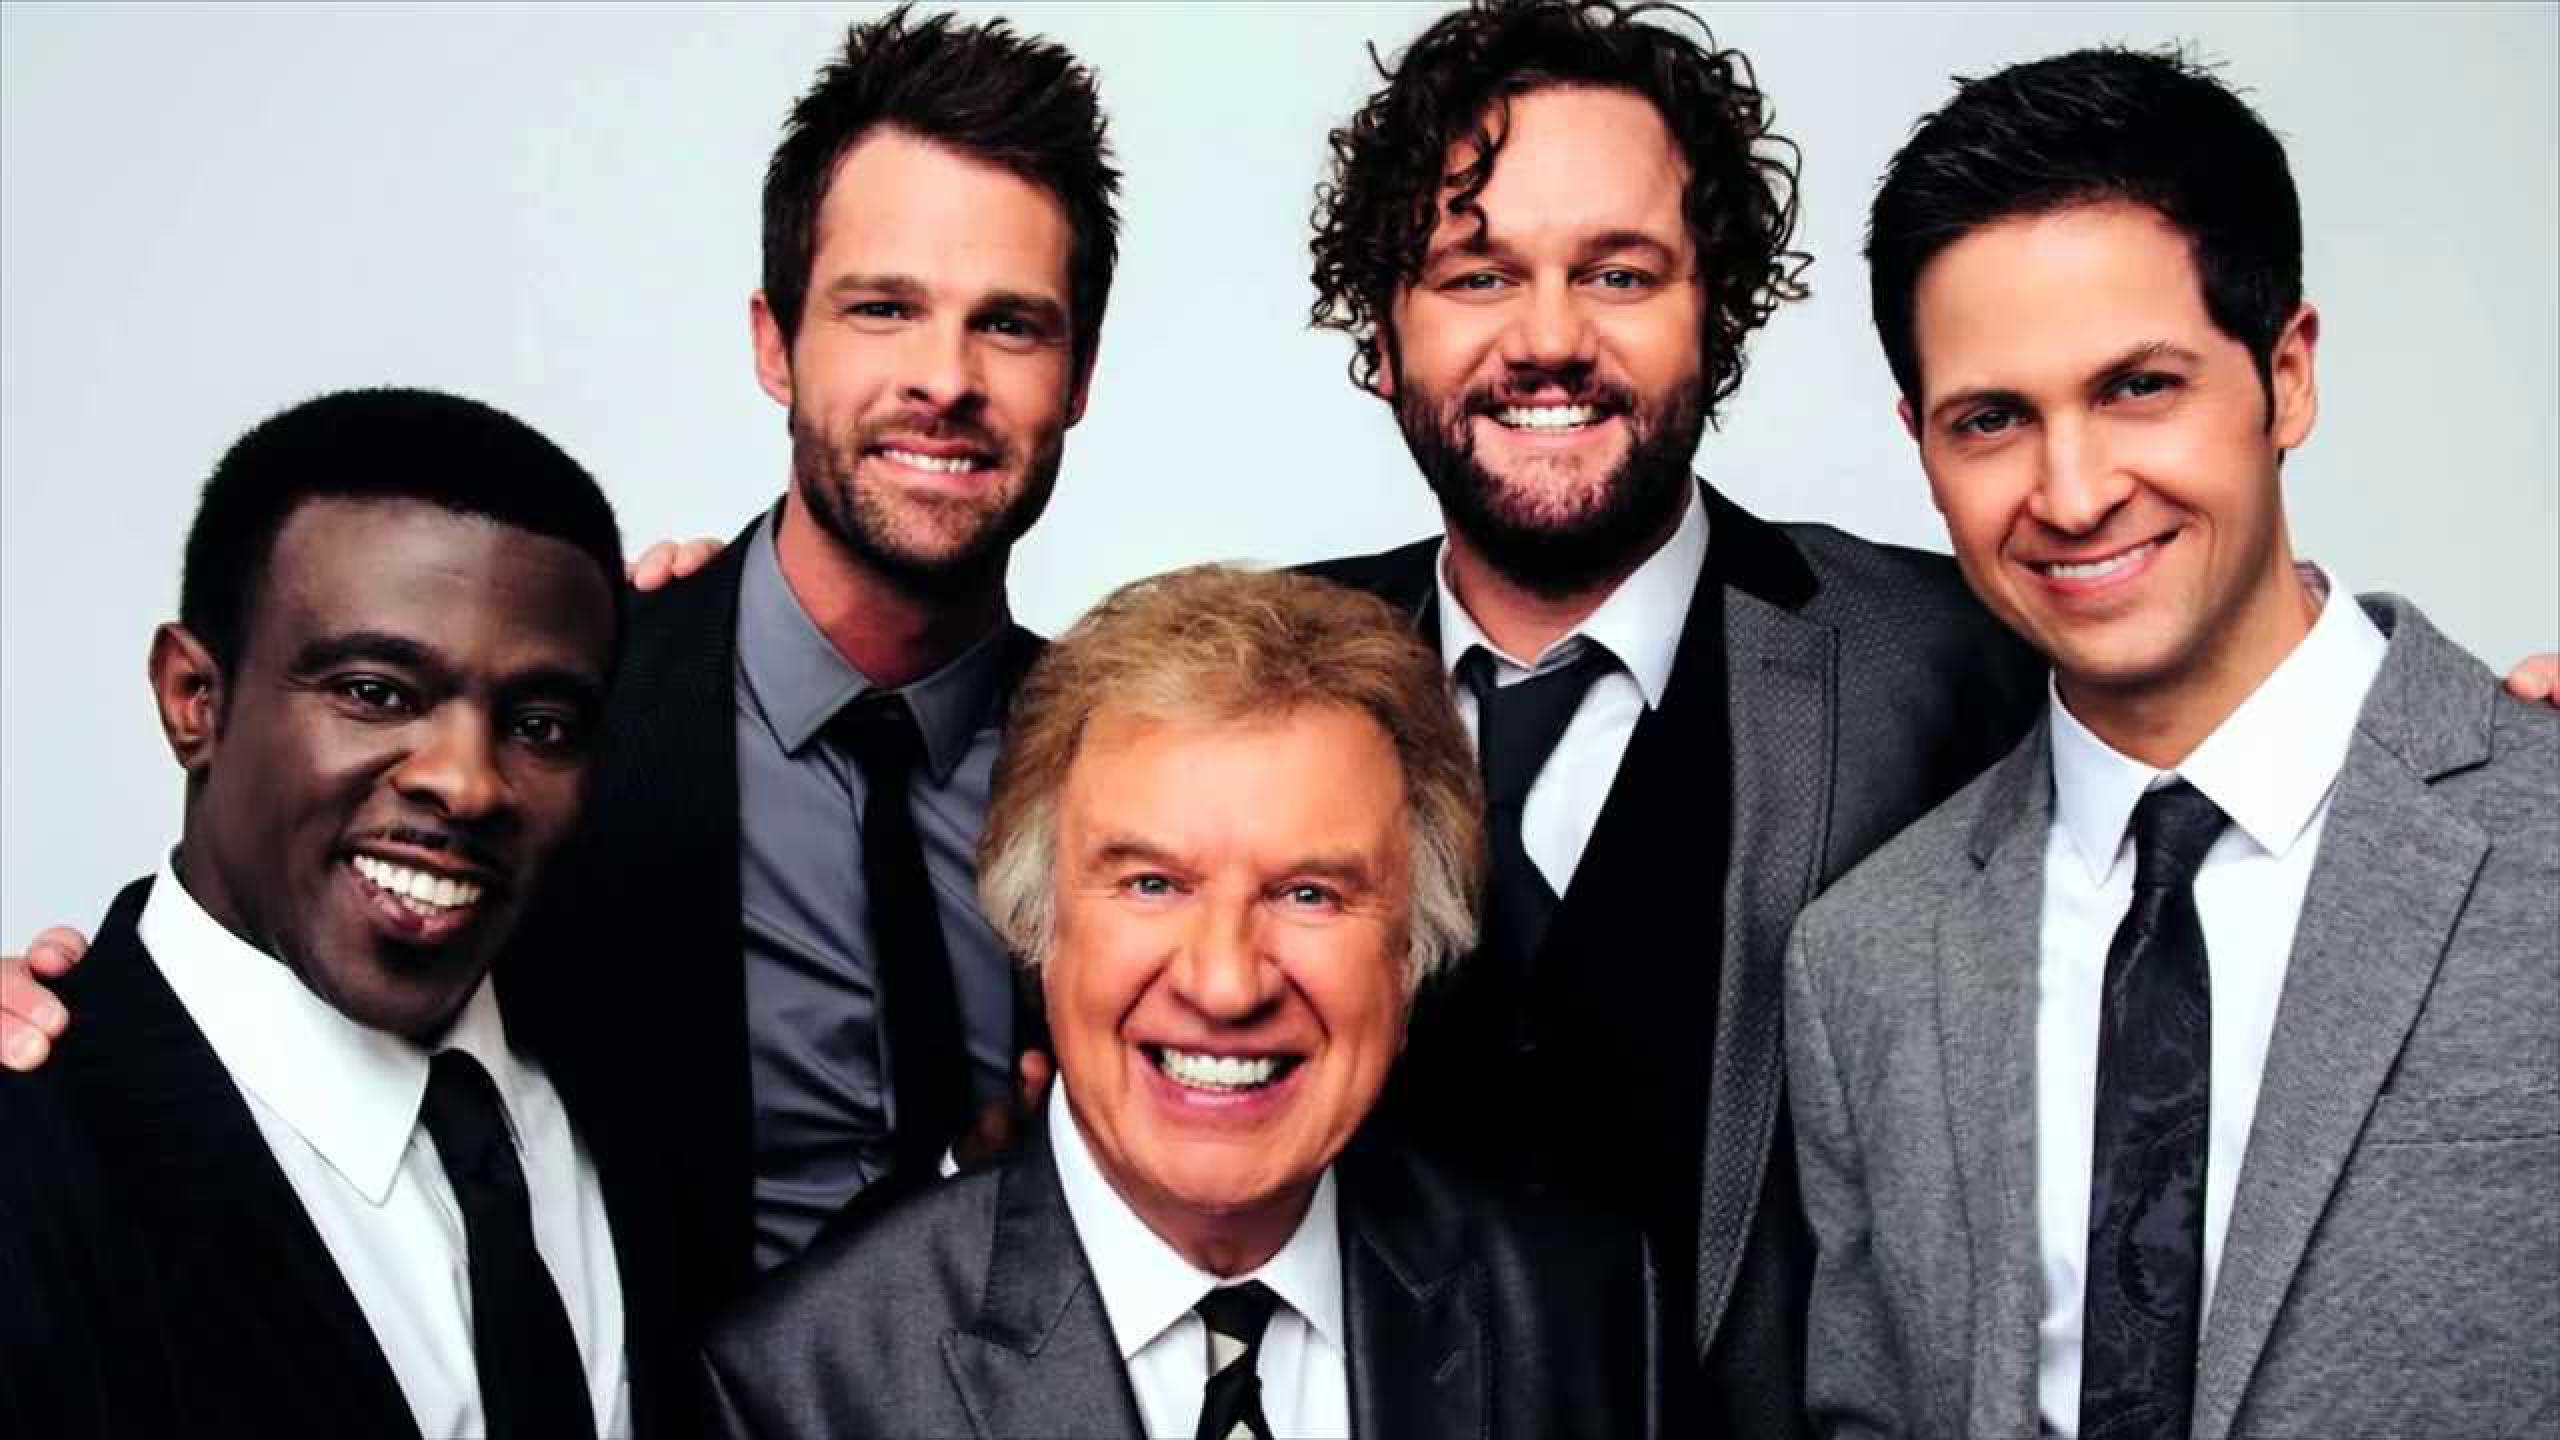 Gaither Vocal Band 1492556441.13.2560x1440 